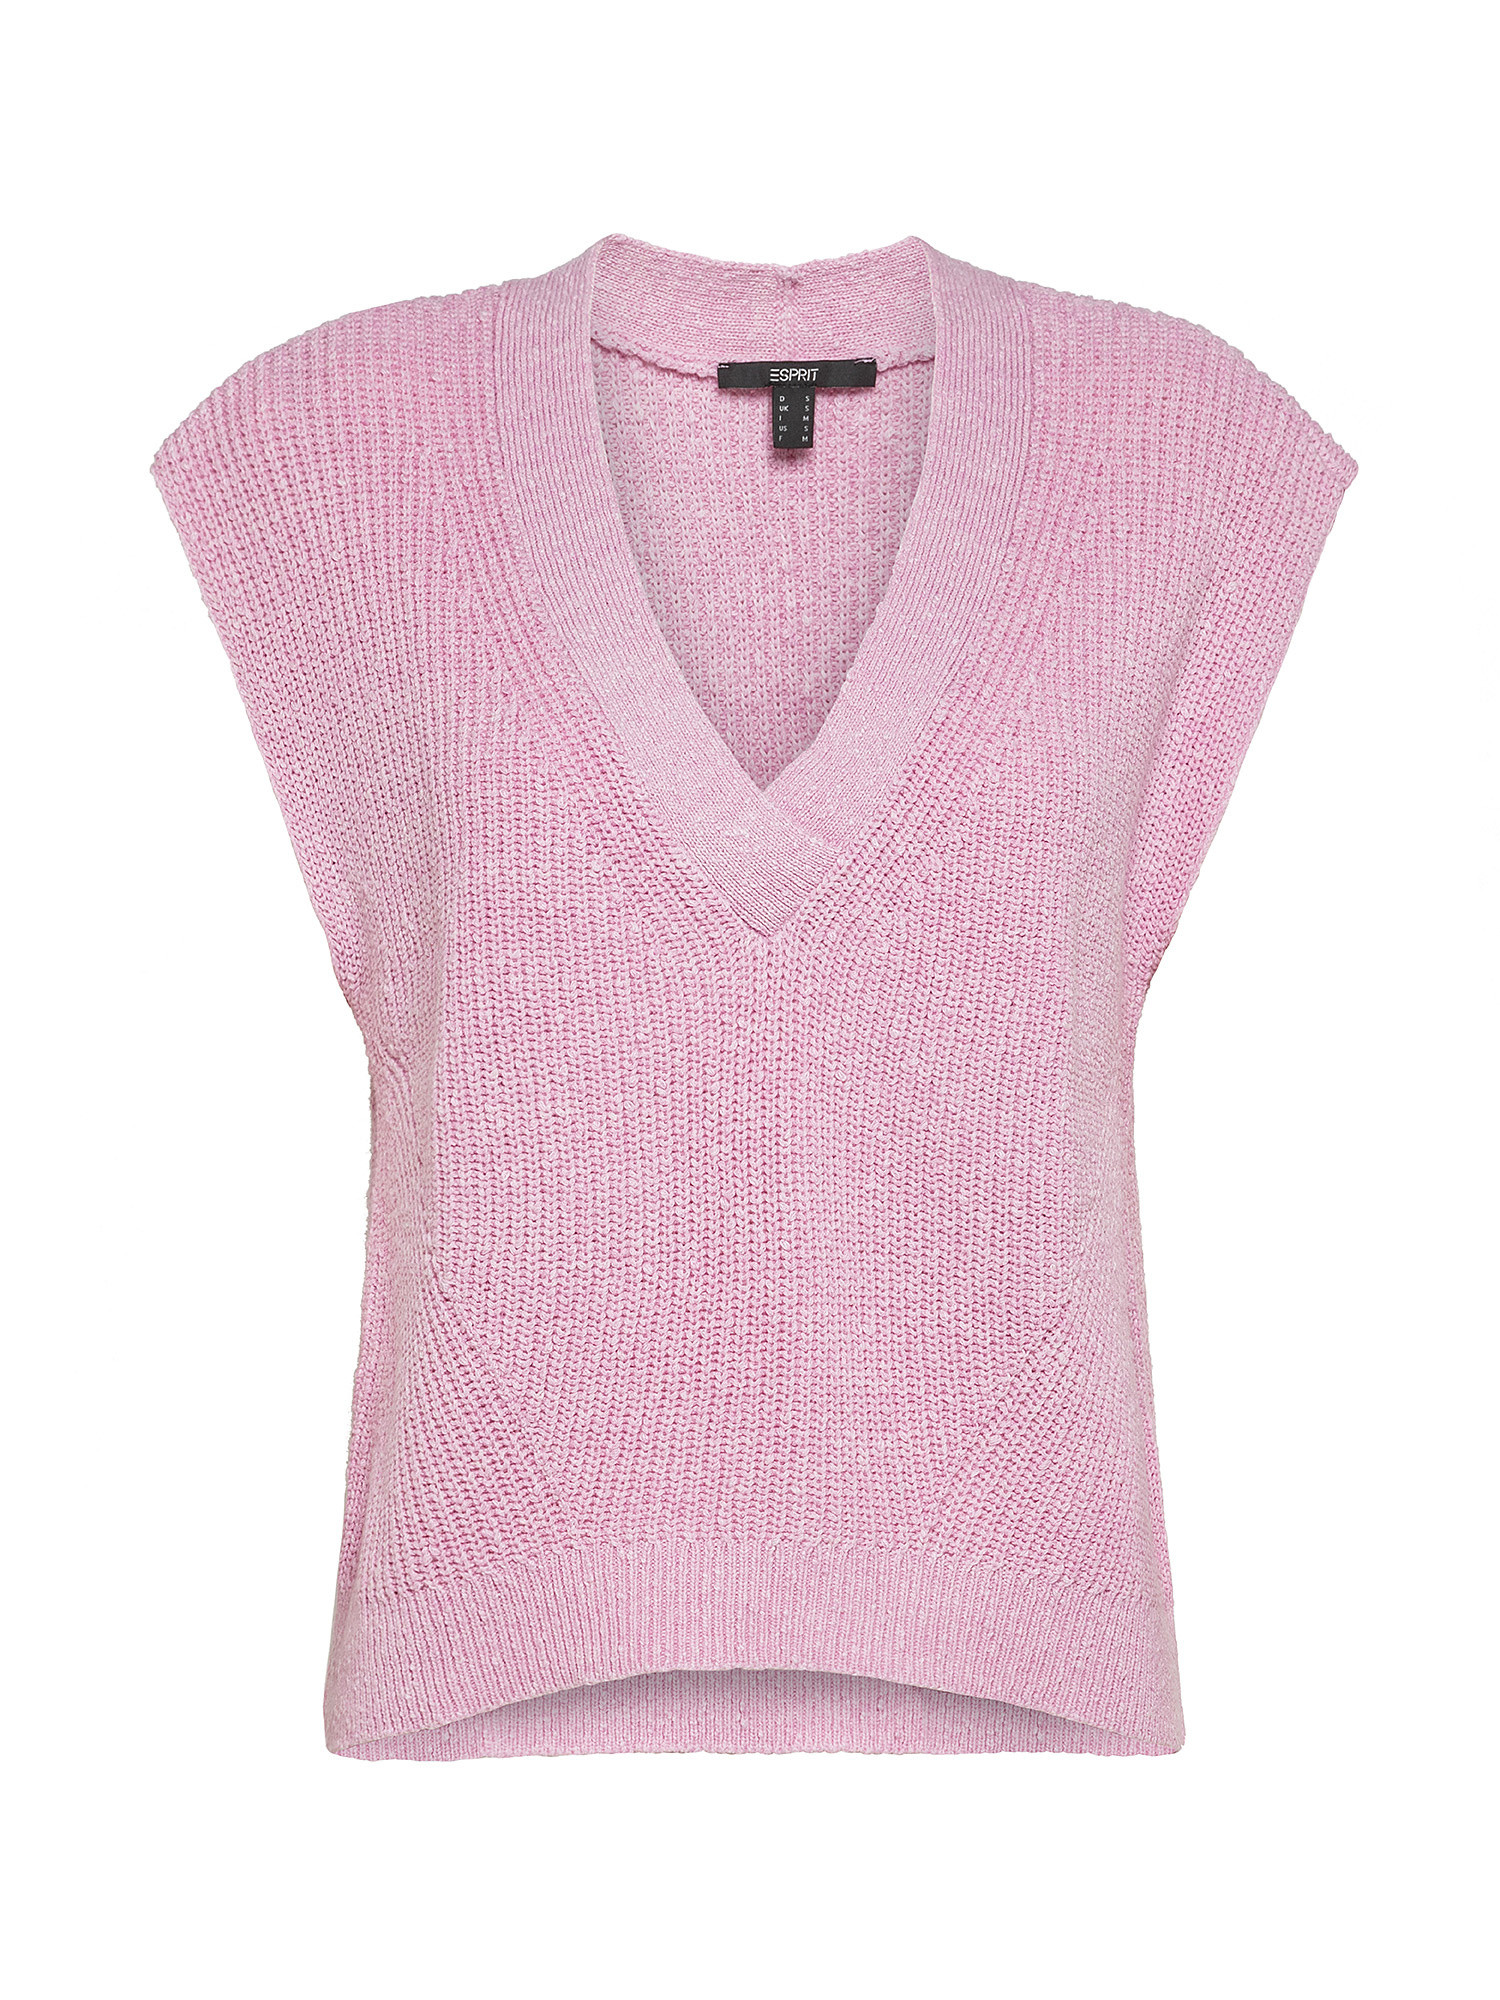 Loose-knit pullover in cotton blend, Pink, large image number 0